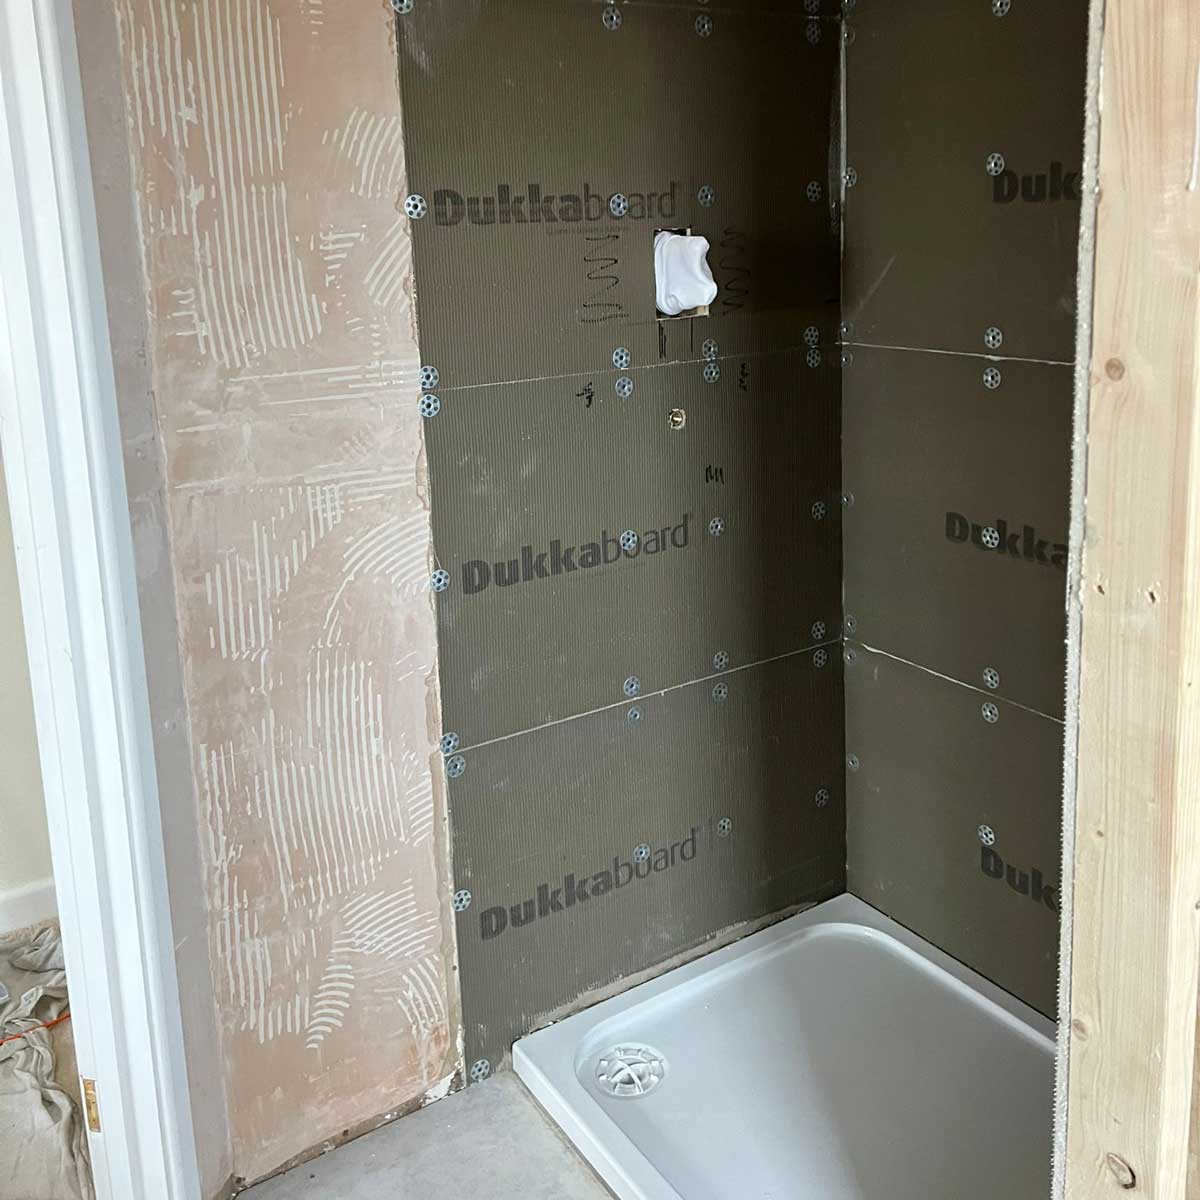 Creating the new enlarged shower for a customer in Lytchett Matravers